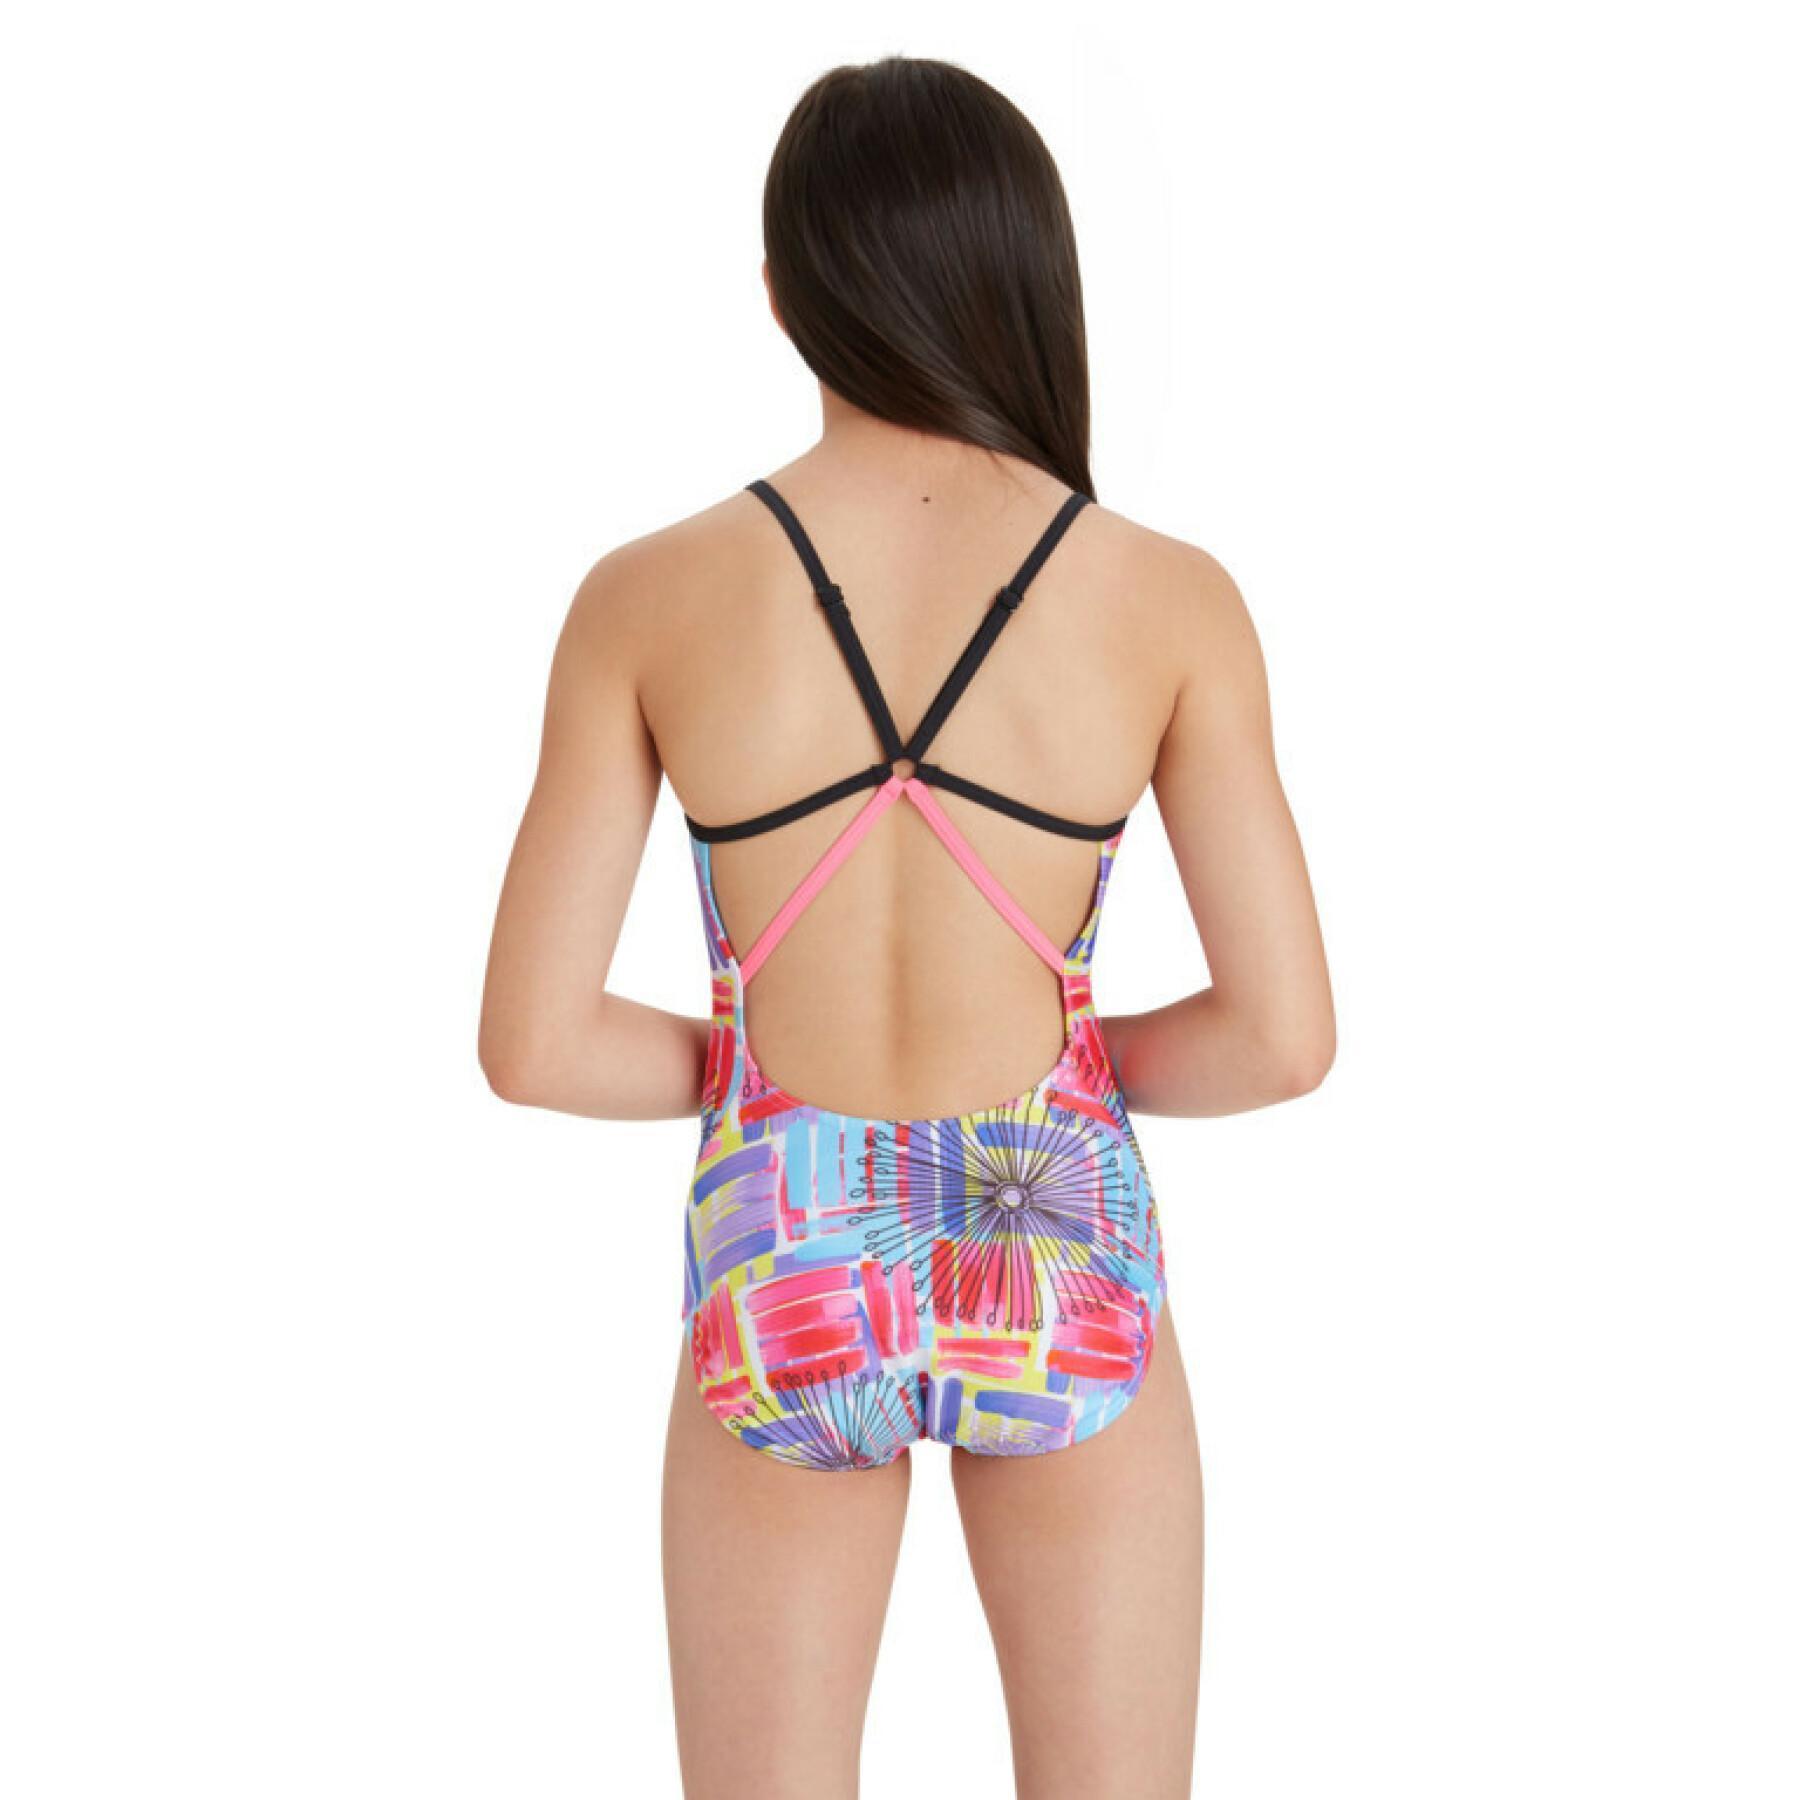 1-piece swimsuit for girls Zoggs Starback